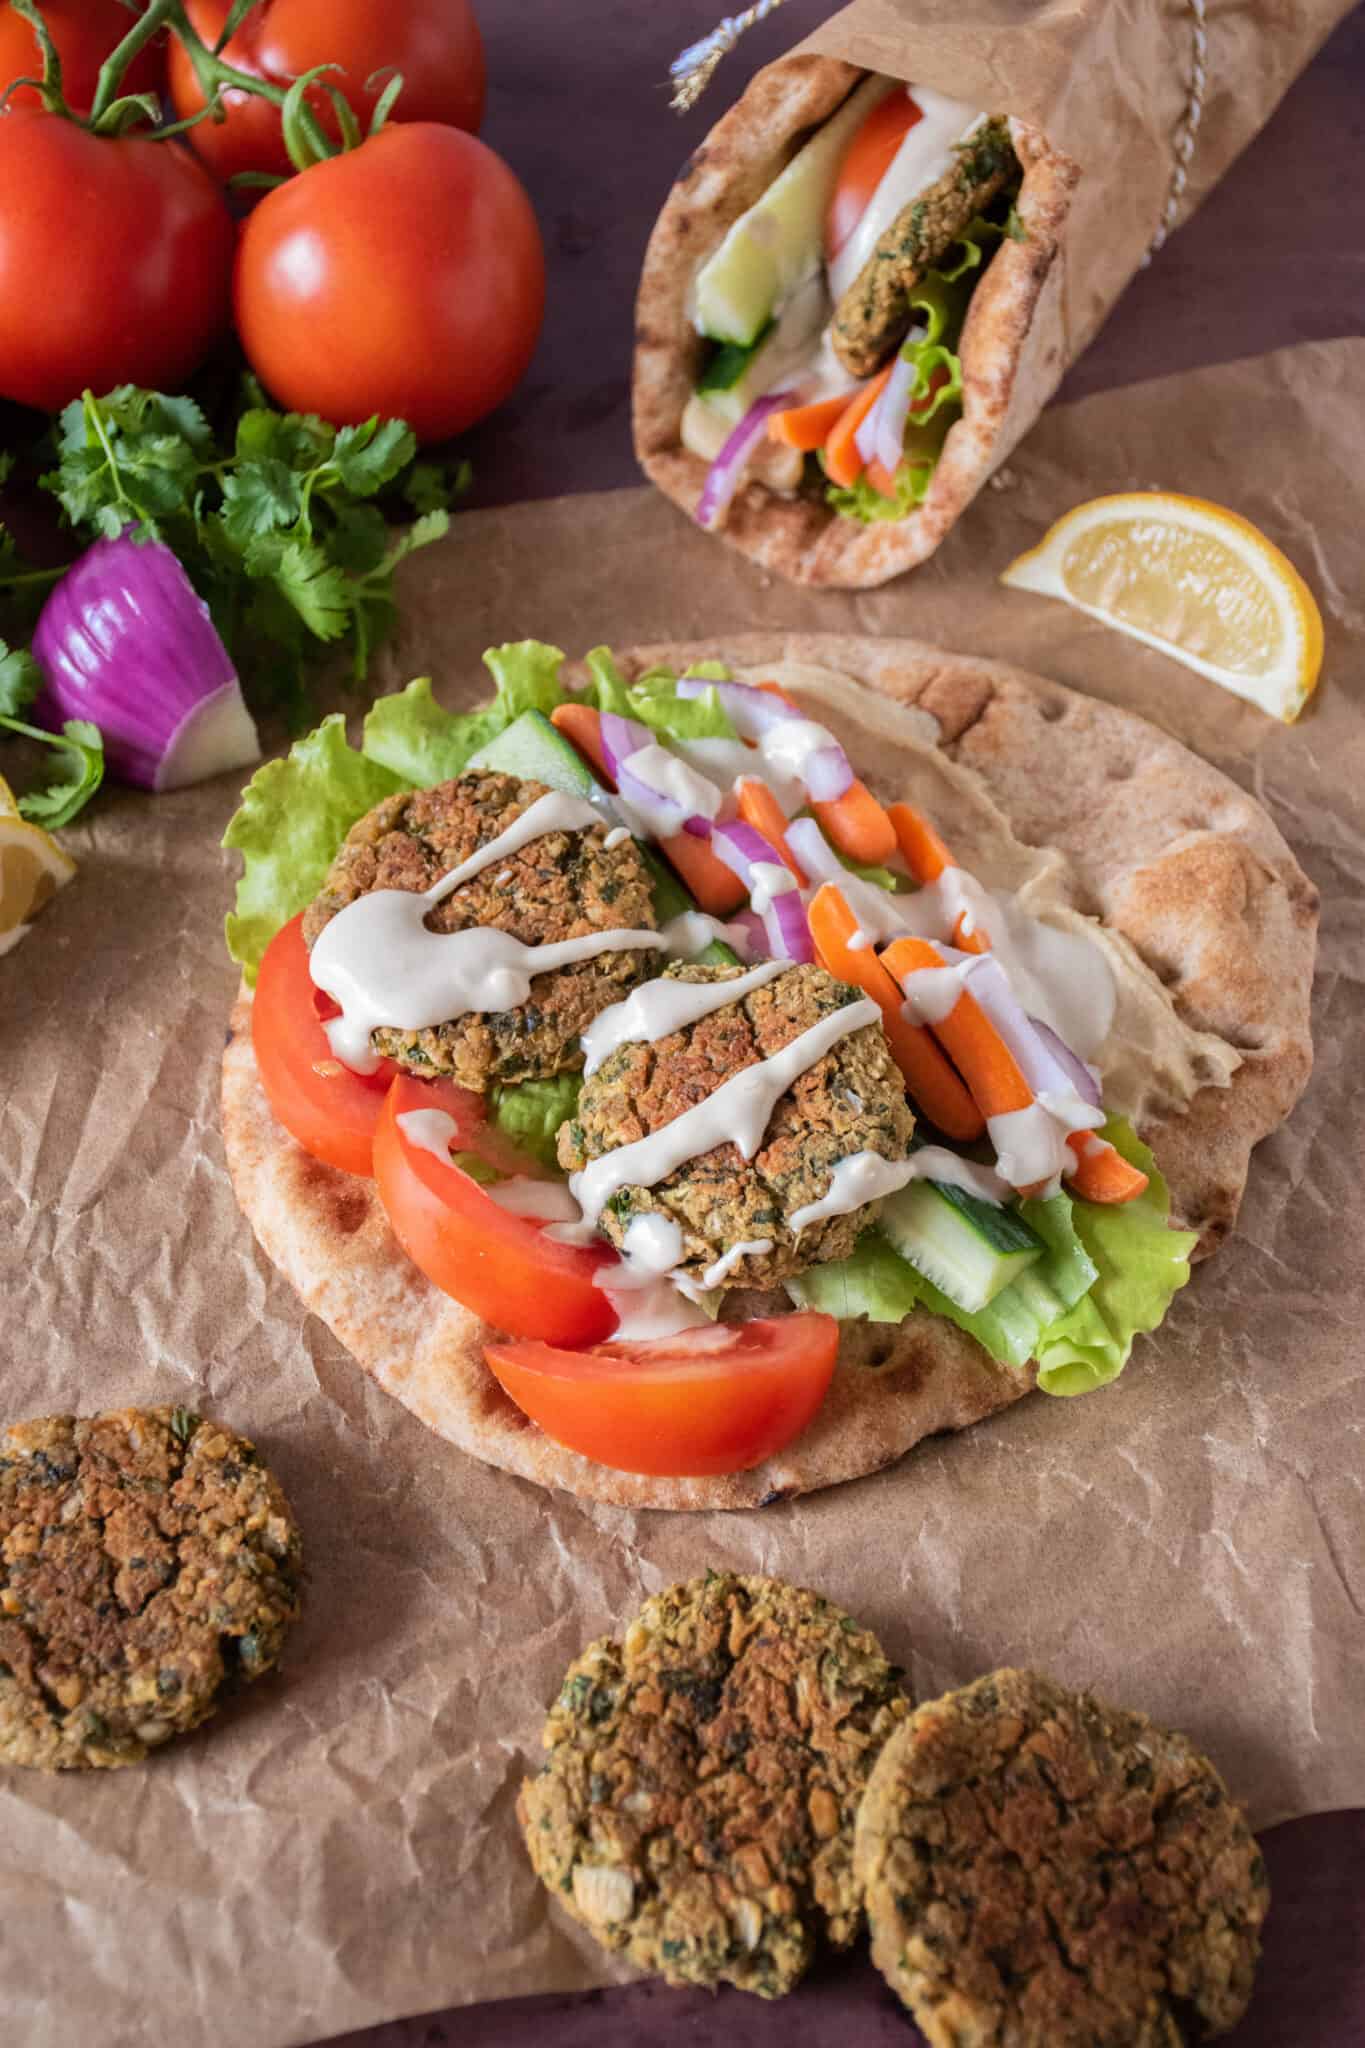 Open flatbread with lettuce, tomato, carrots, onions, cucumbers, and falafel with tahini dressing drizzled over it.